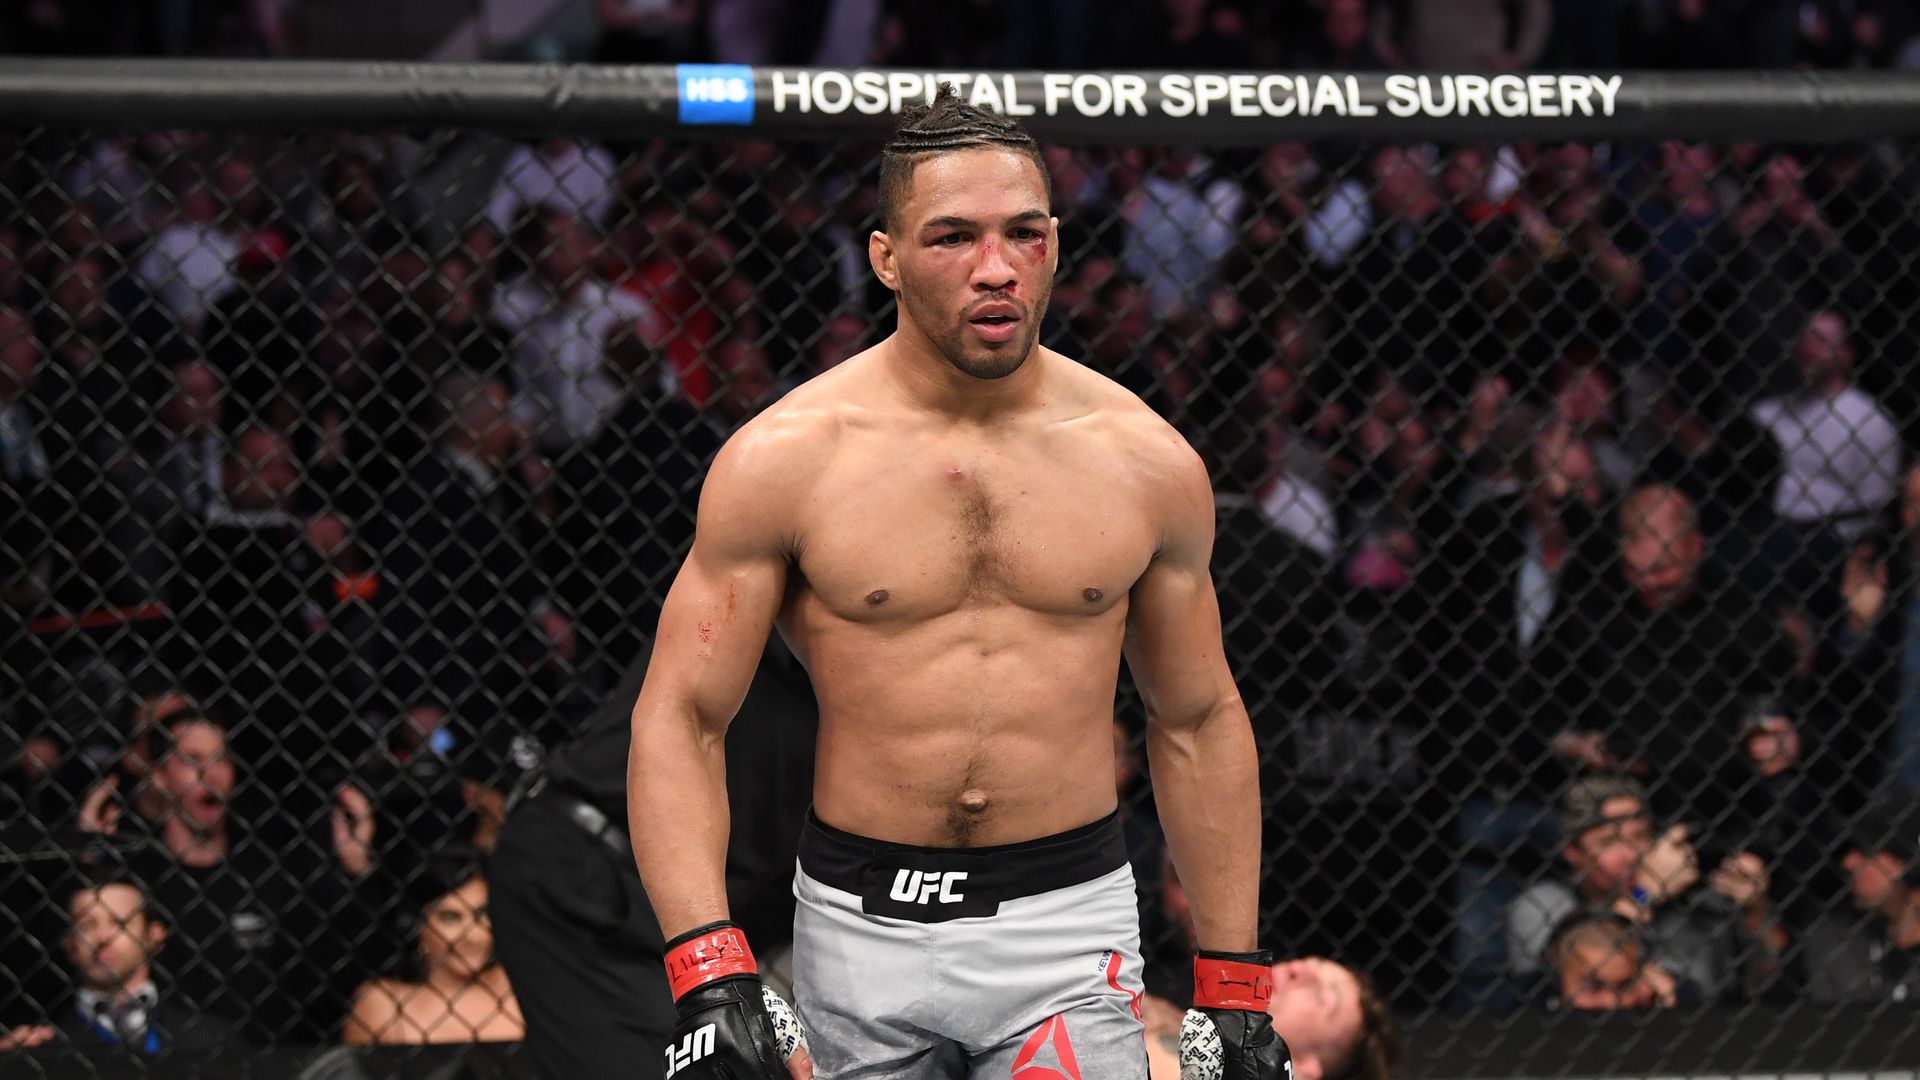 kevin lee explains decision to return from retirement, reveals timeline to fight again after acl surgery